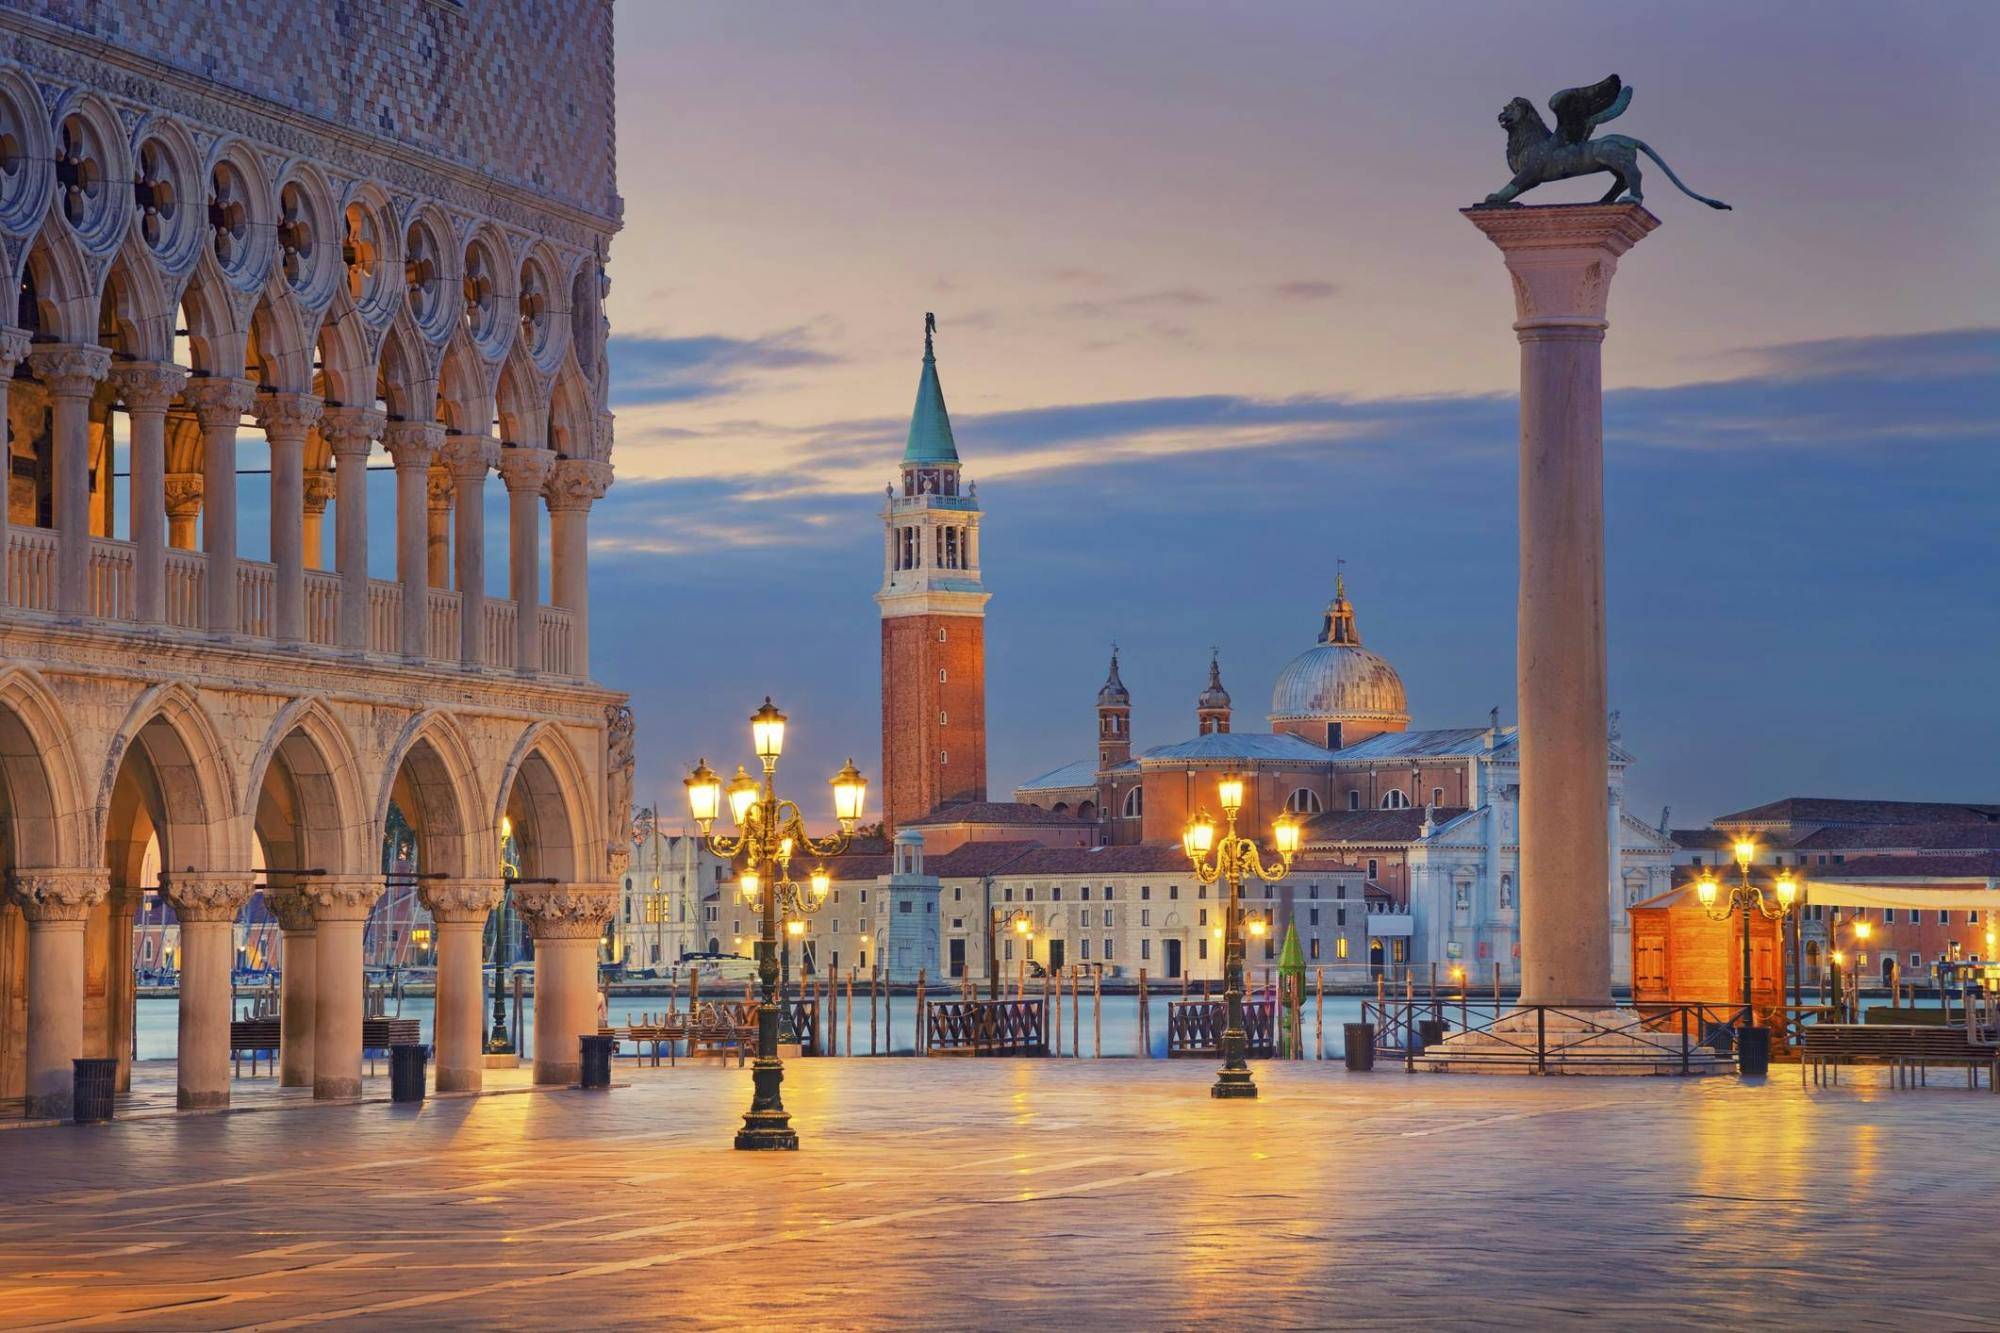 St Mark’s Basilica skip the line ticket with audioguide and Venice city self